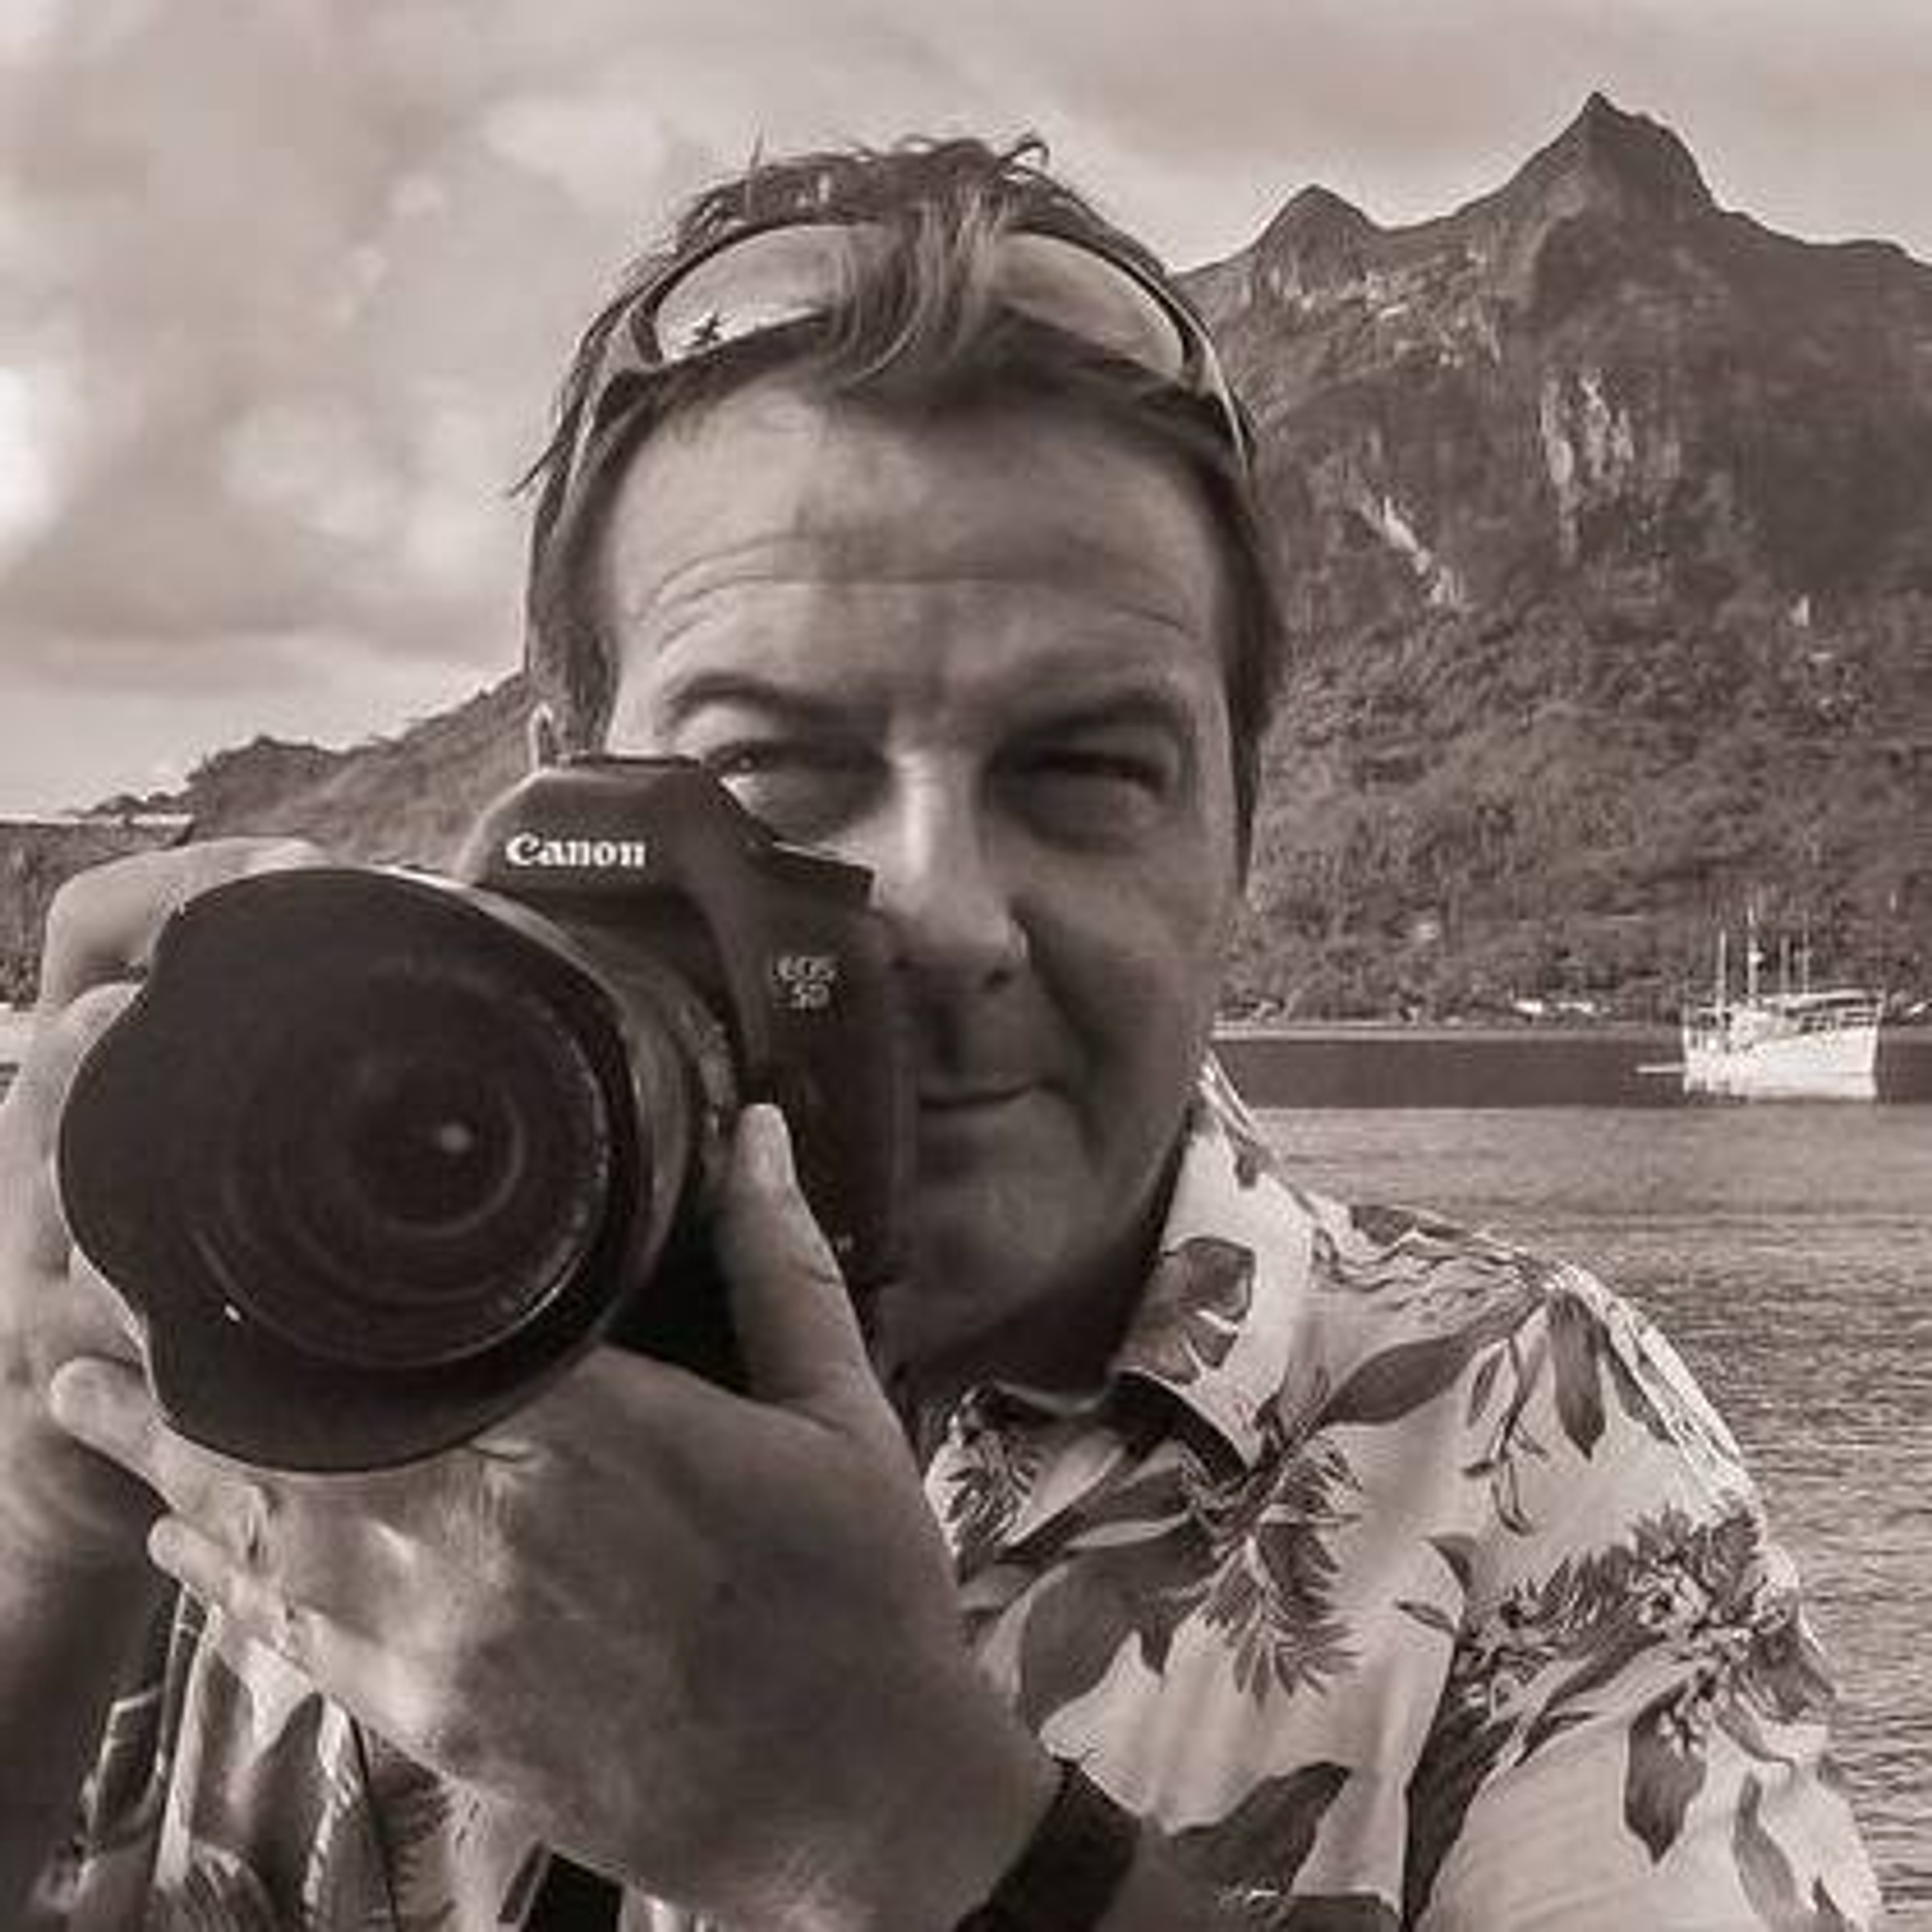 We are Stephan & Bonnie - Photographer based in Bora Bora but we do operate in the the US as well.